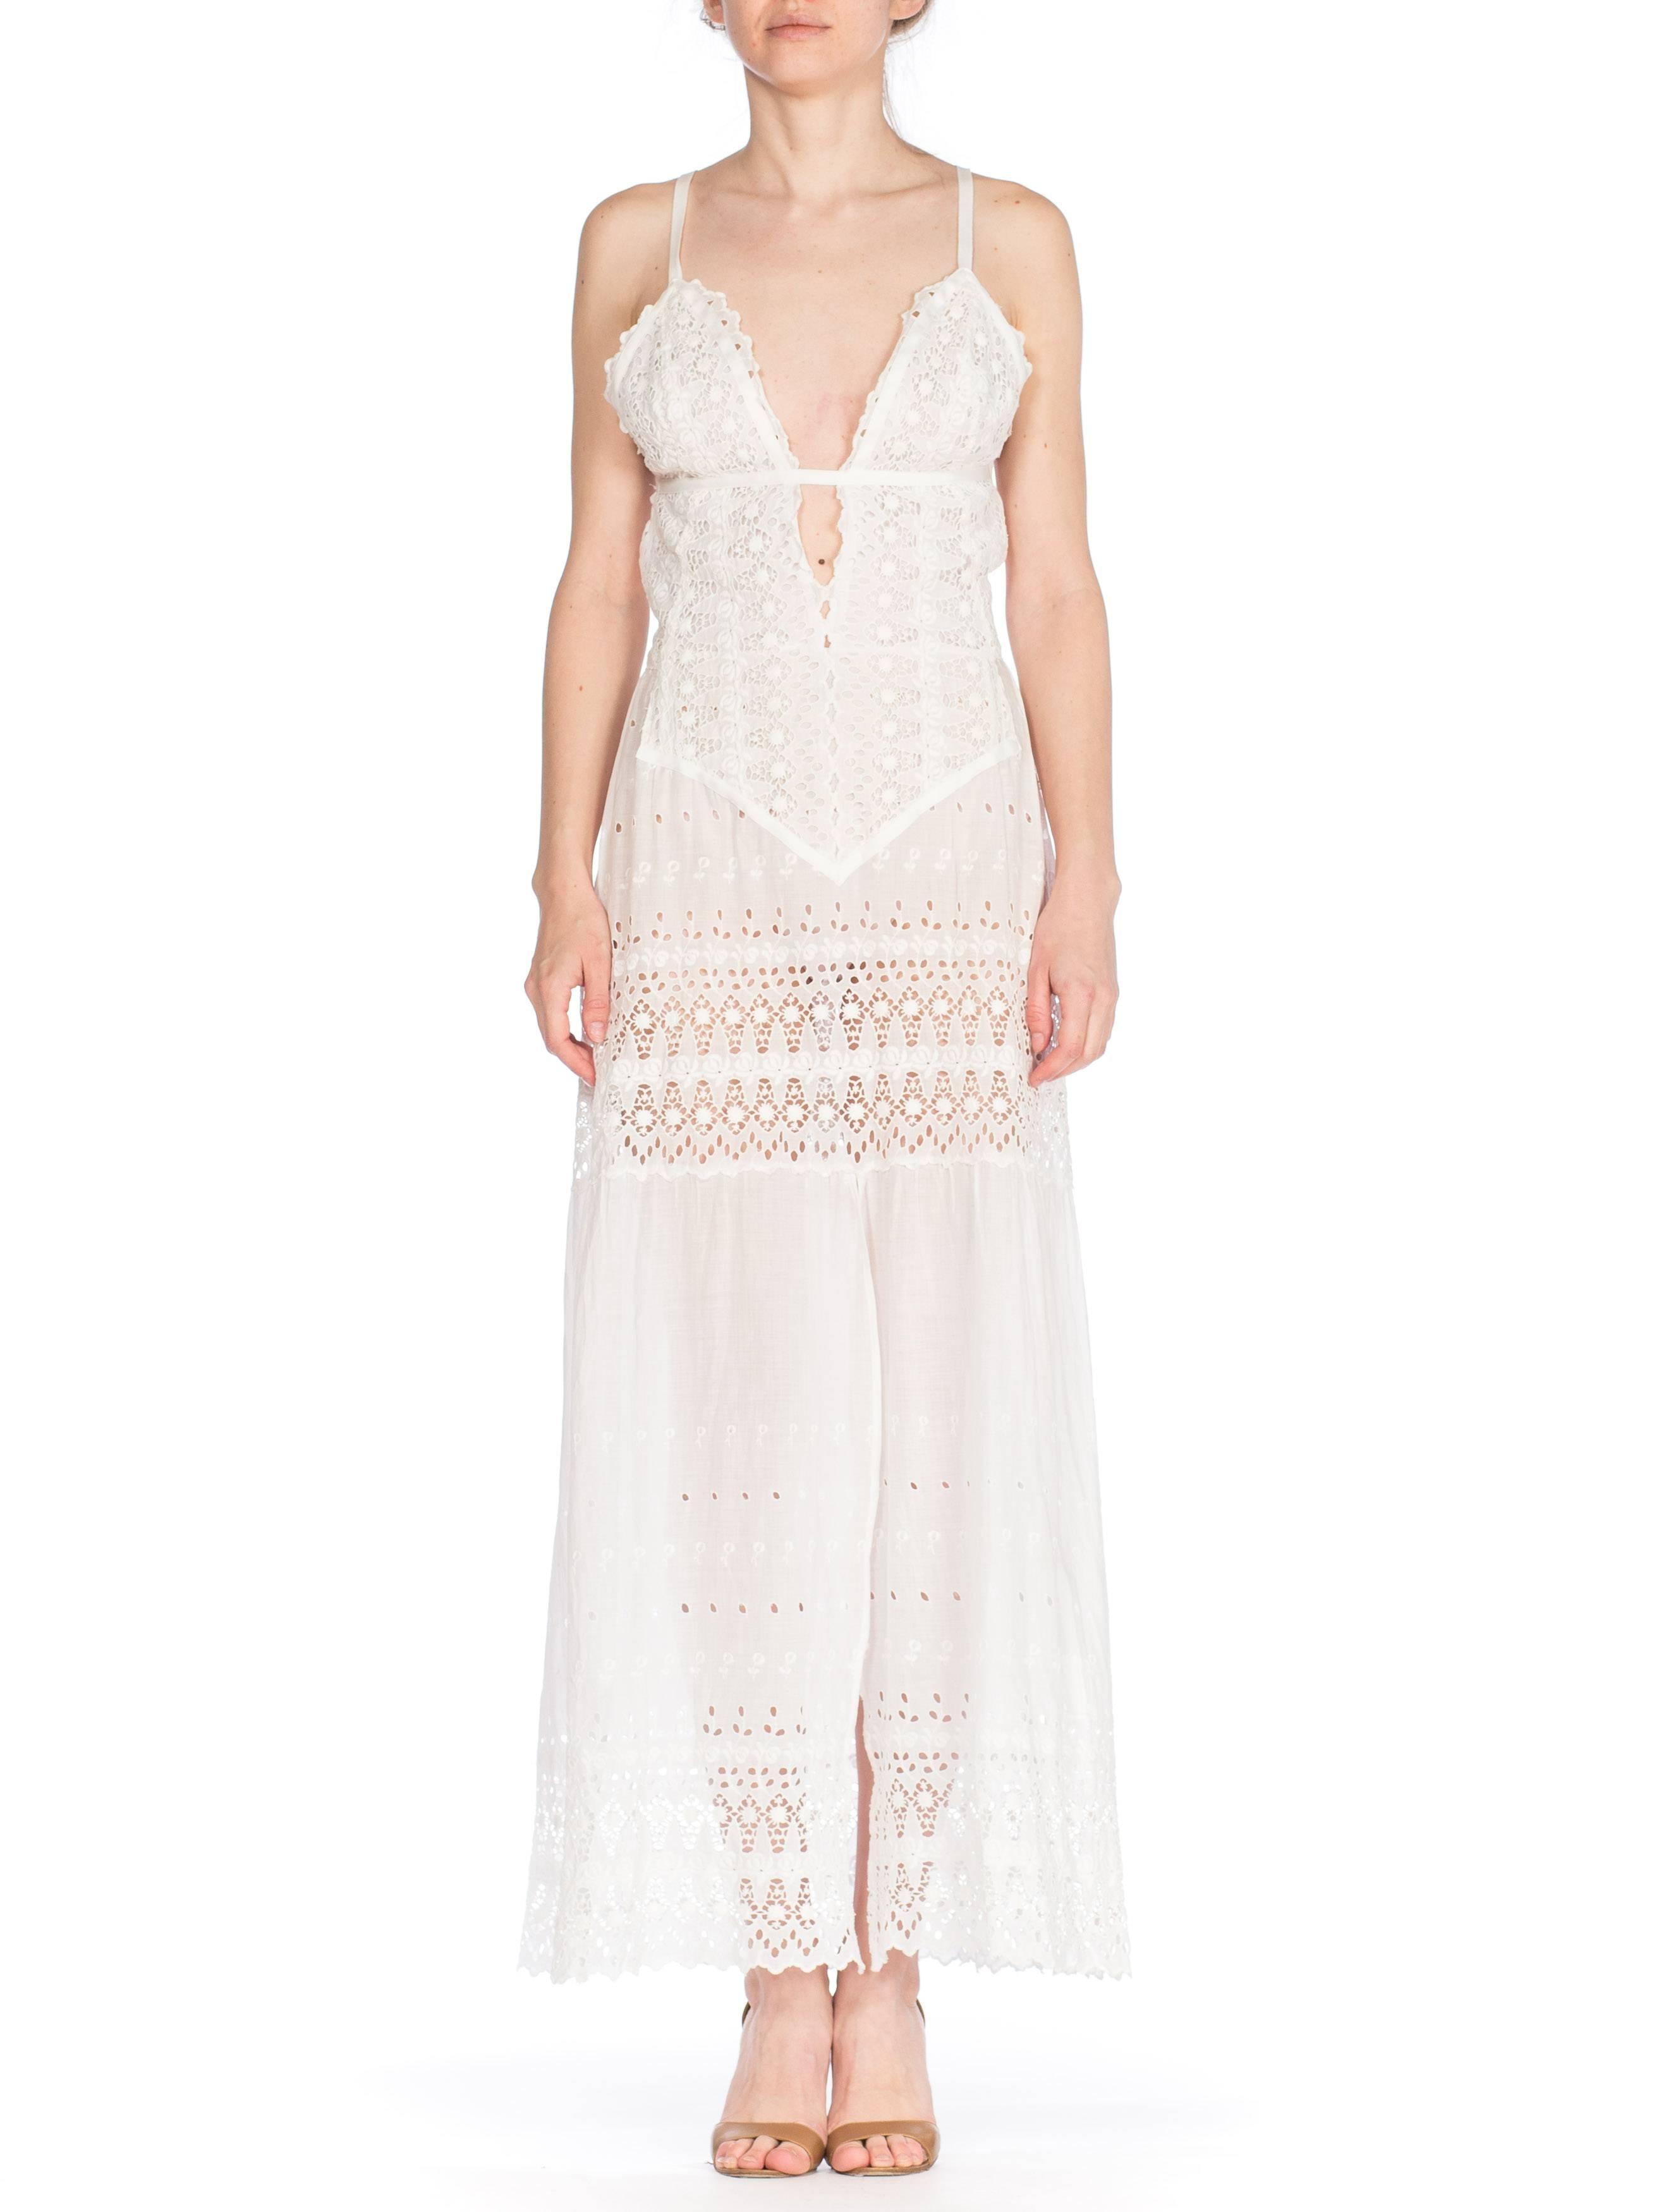 Gray White Cotton Victorian Eyelet  Embroidered Lace Maxi Dress